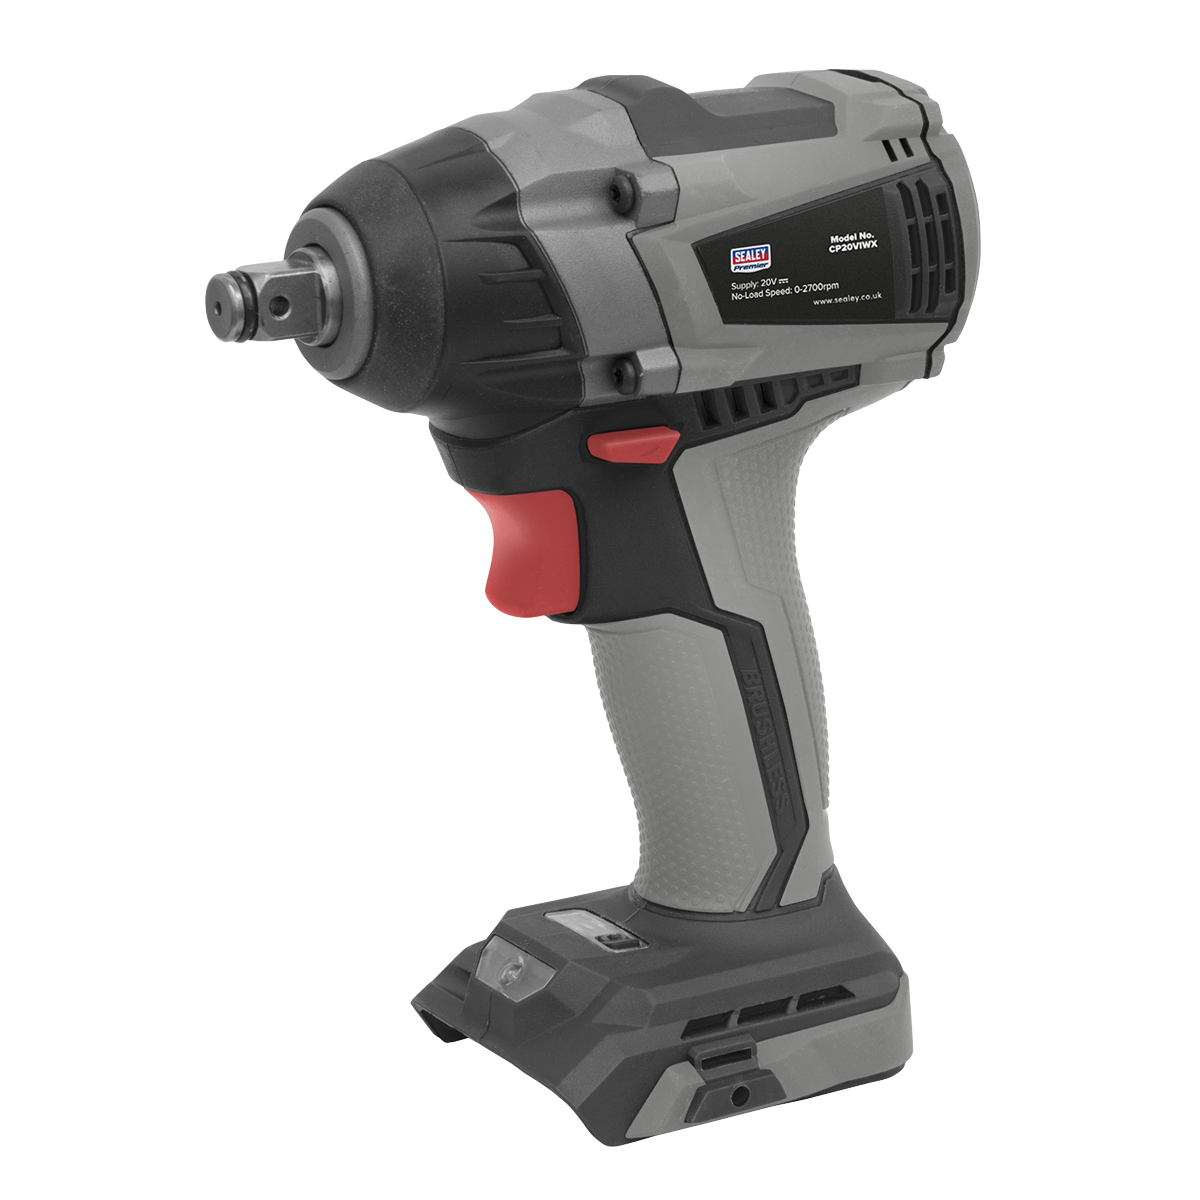 Sealey battery powered impact wrench